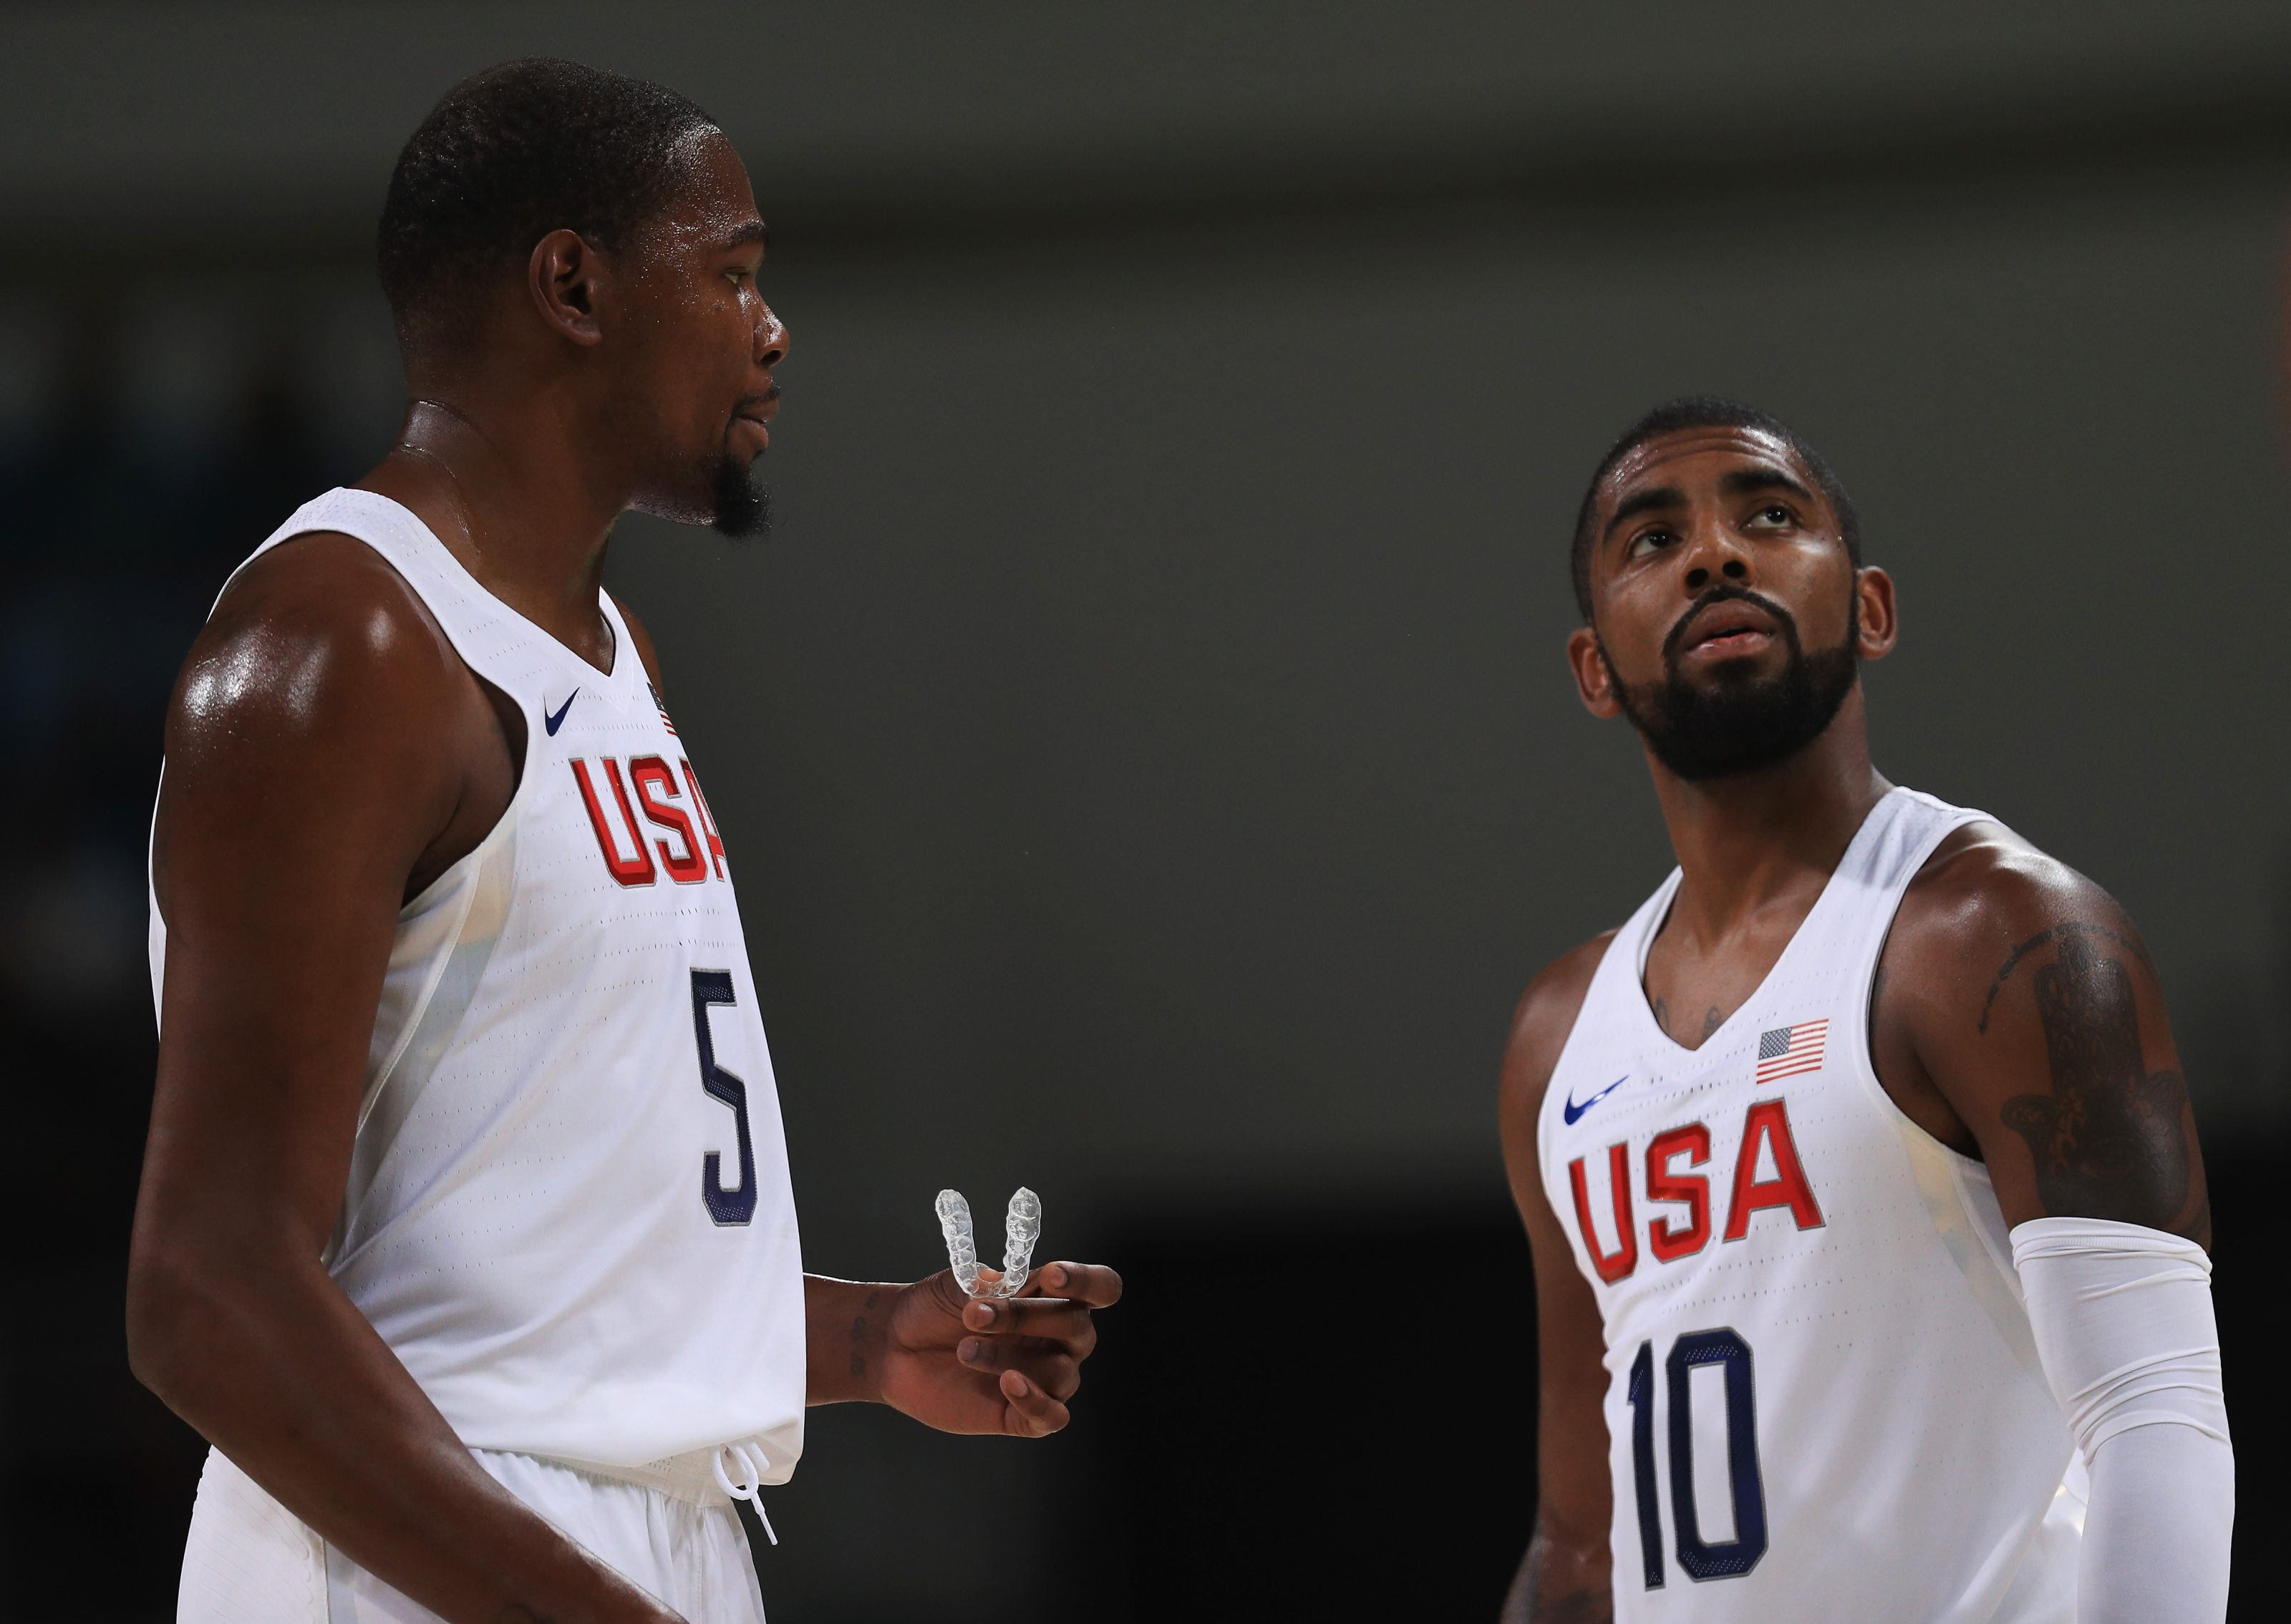 Report: Nets' Kevin Durant will not play this season after NBA restart –  Bronx Times